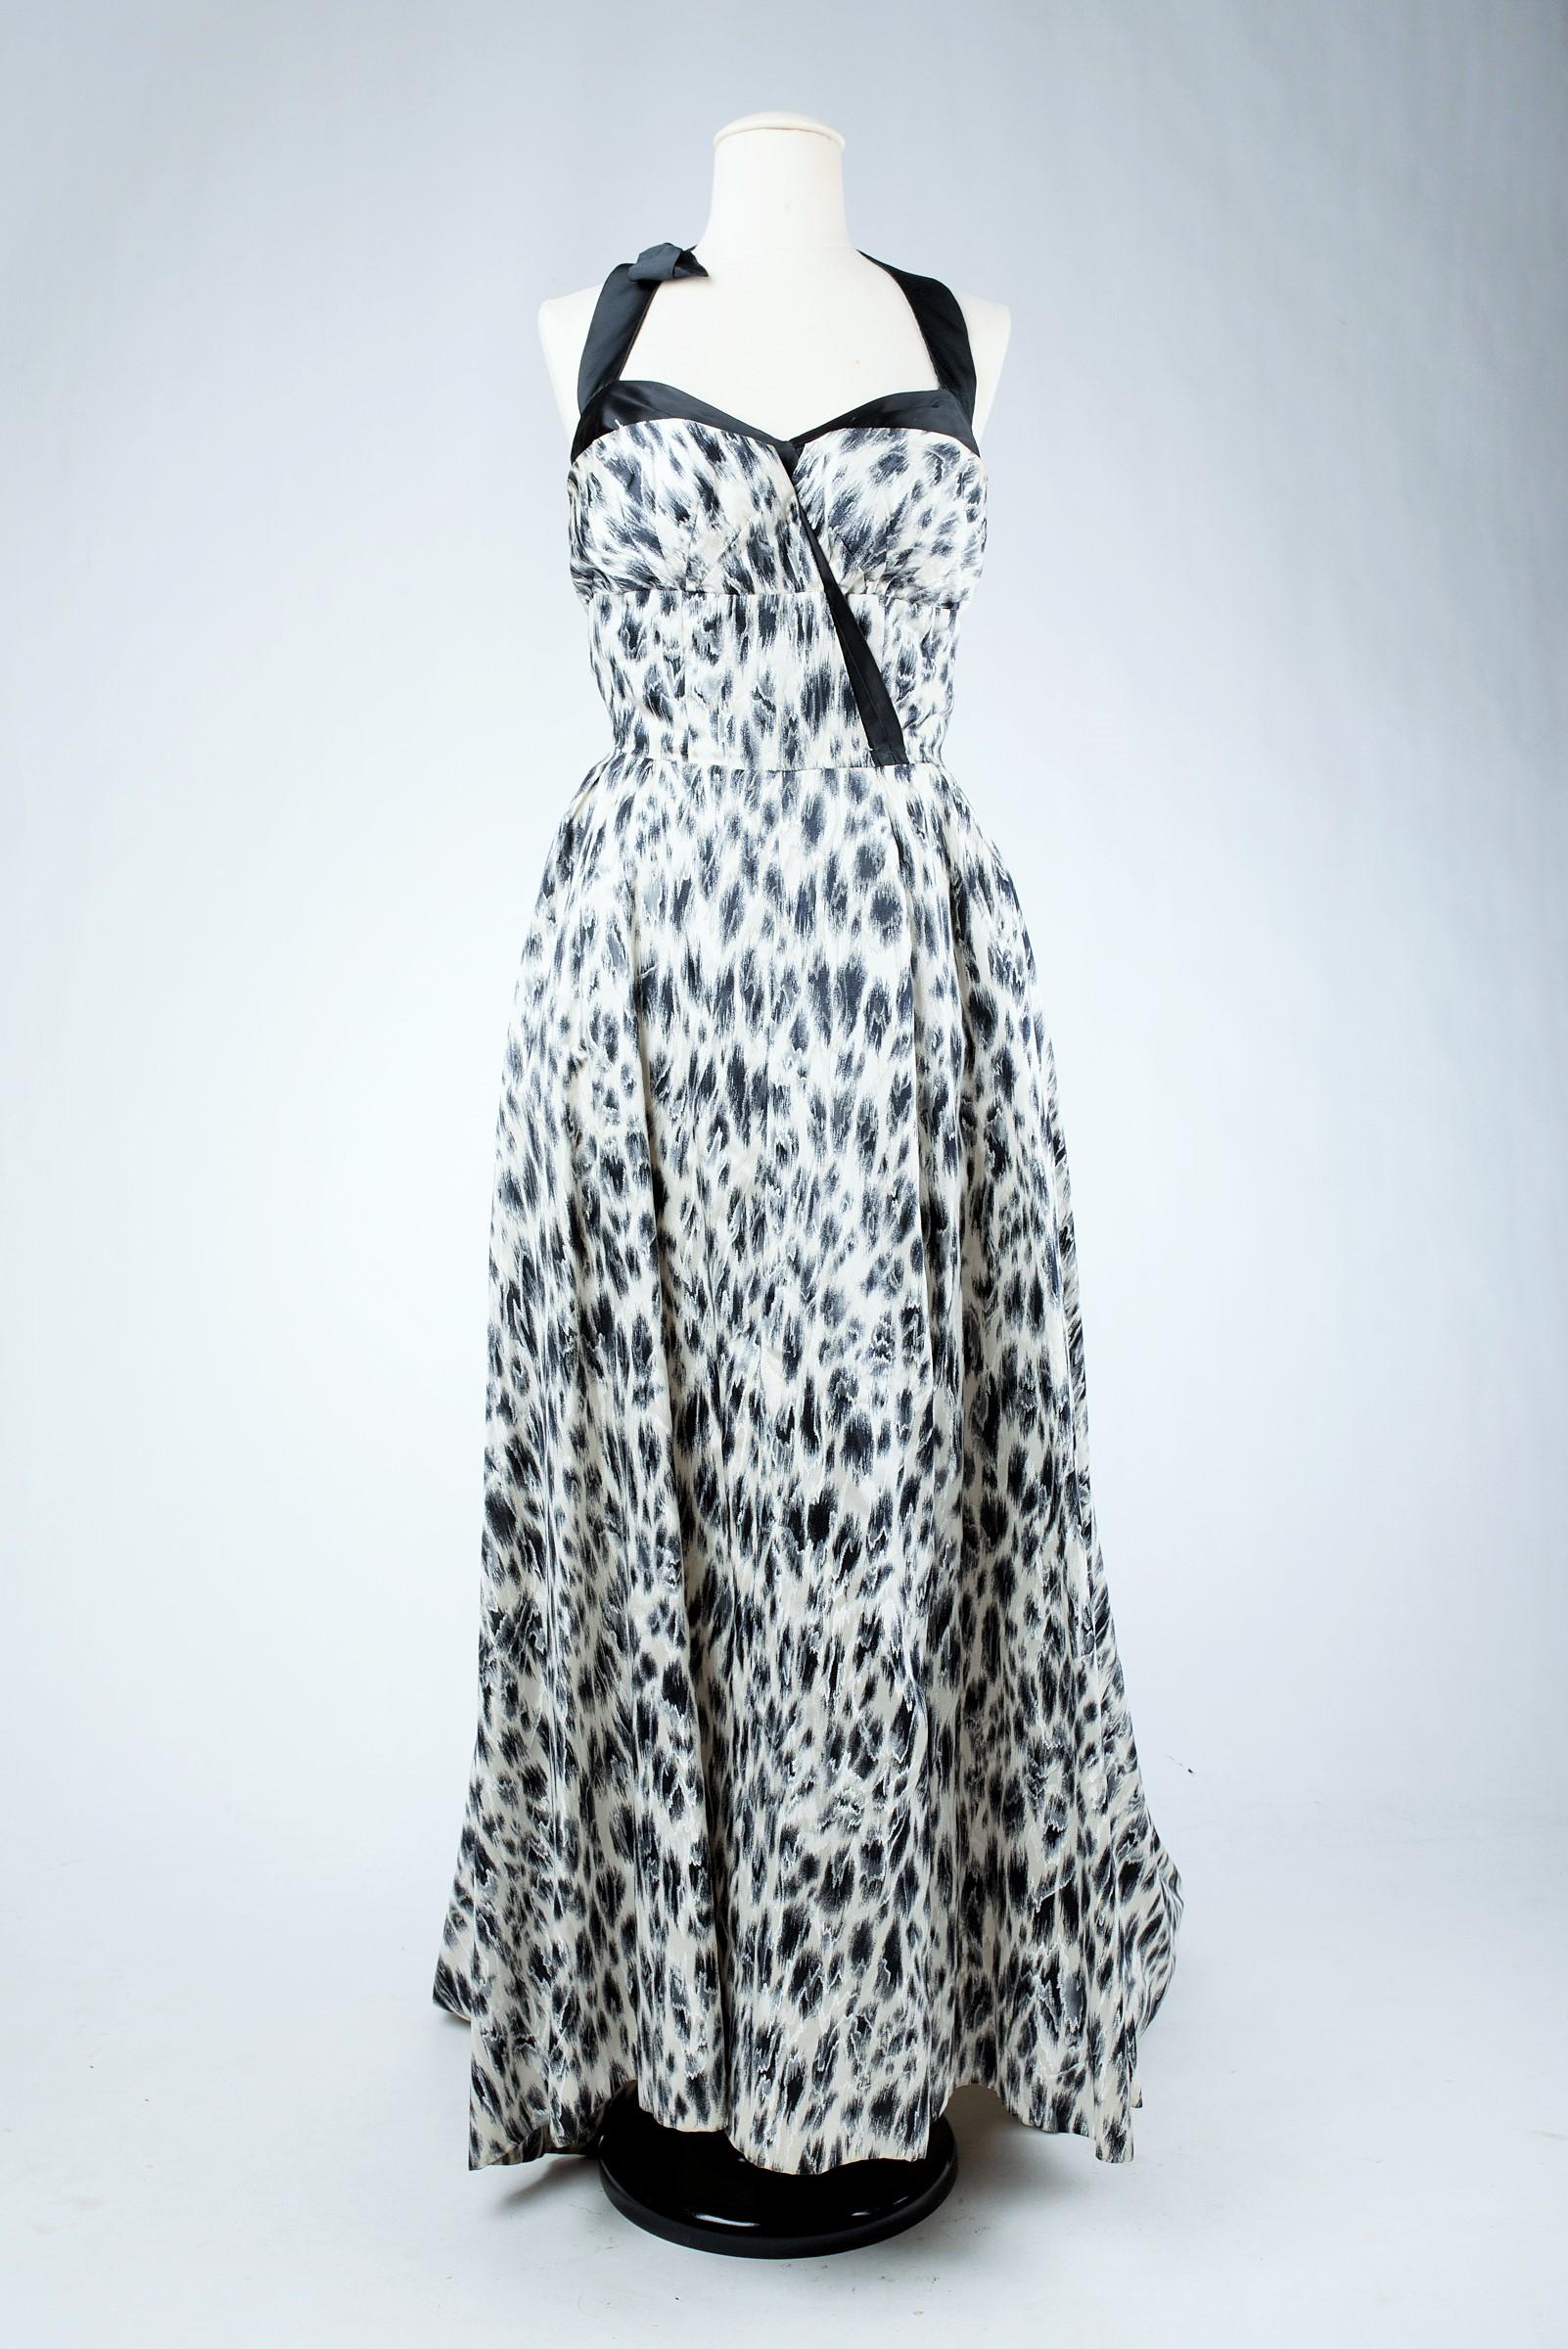 Leopard printed silk Evening Dress by Jacques Fath Haute Couture Circa 1955-1960 For Sale 3